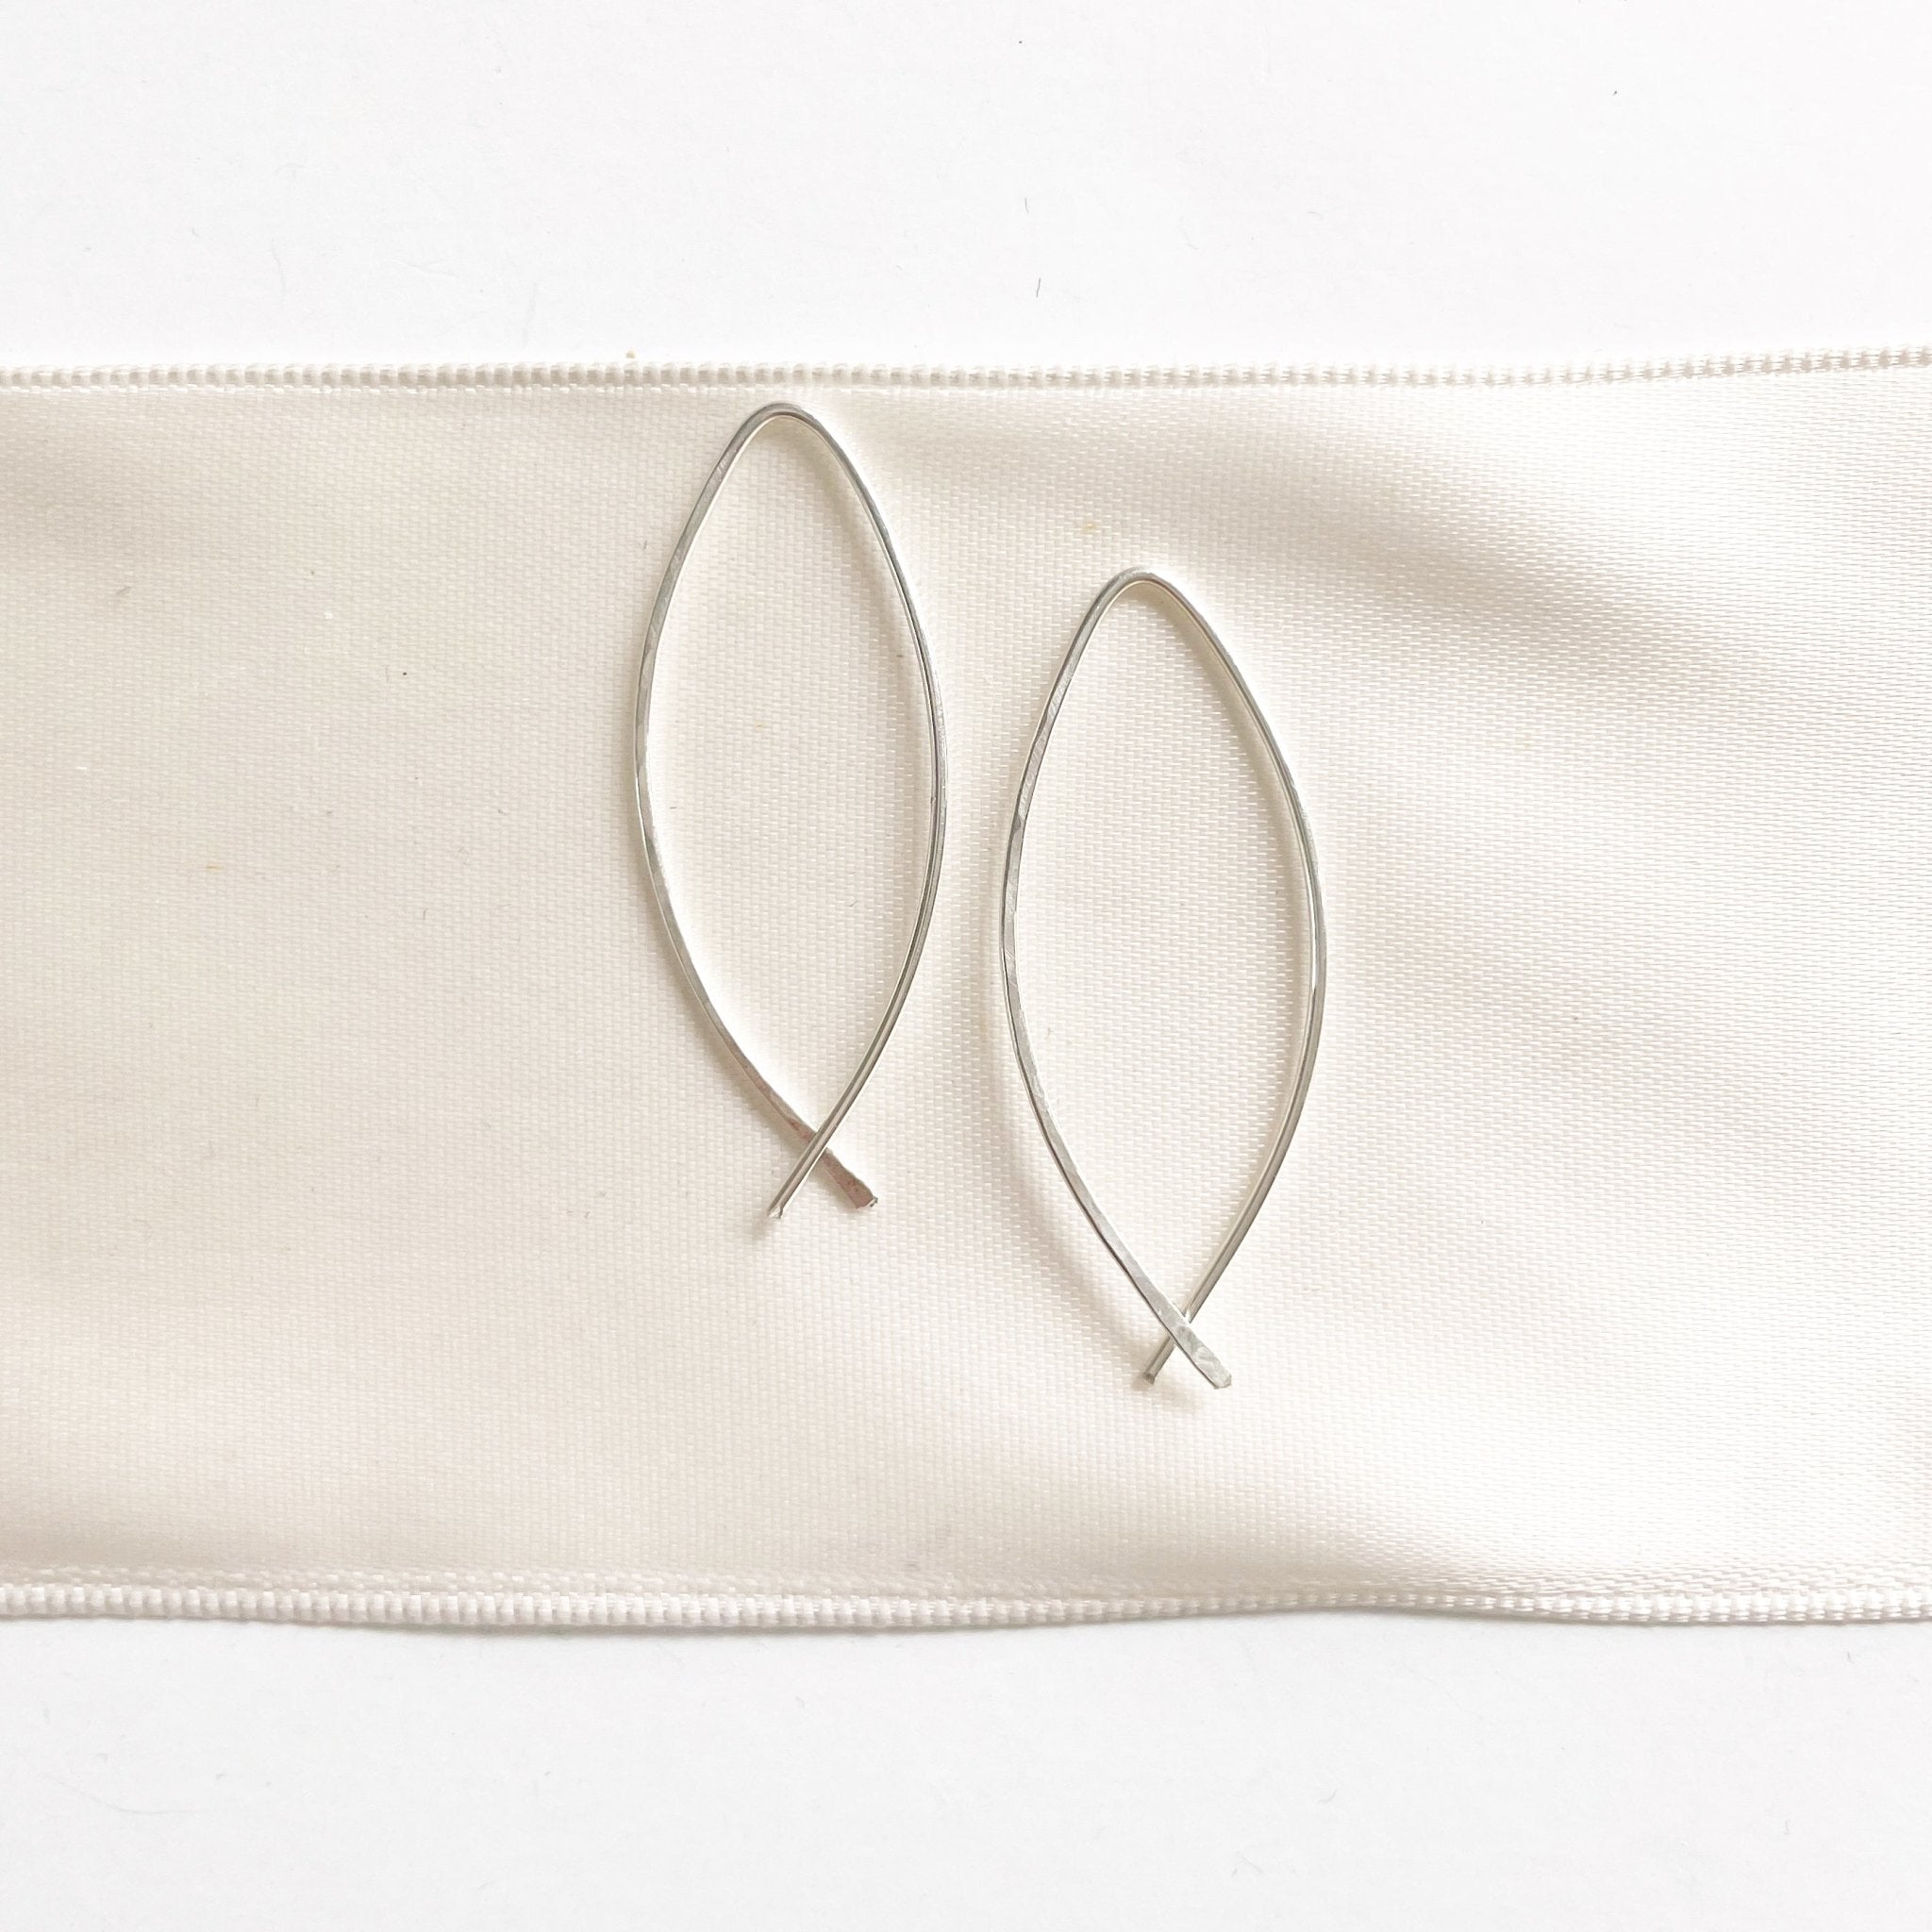 Alice Earrings by Sarah Cornwell Jewelry. Simple lightweight silver threader earrings on white background.